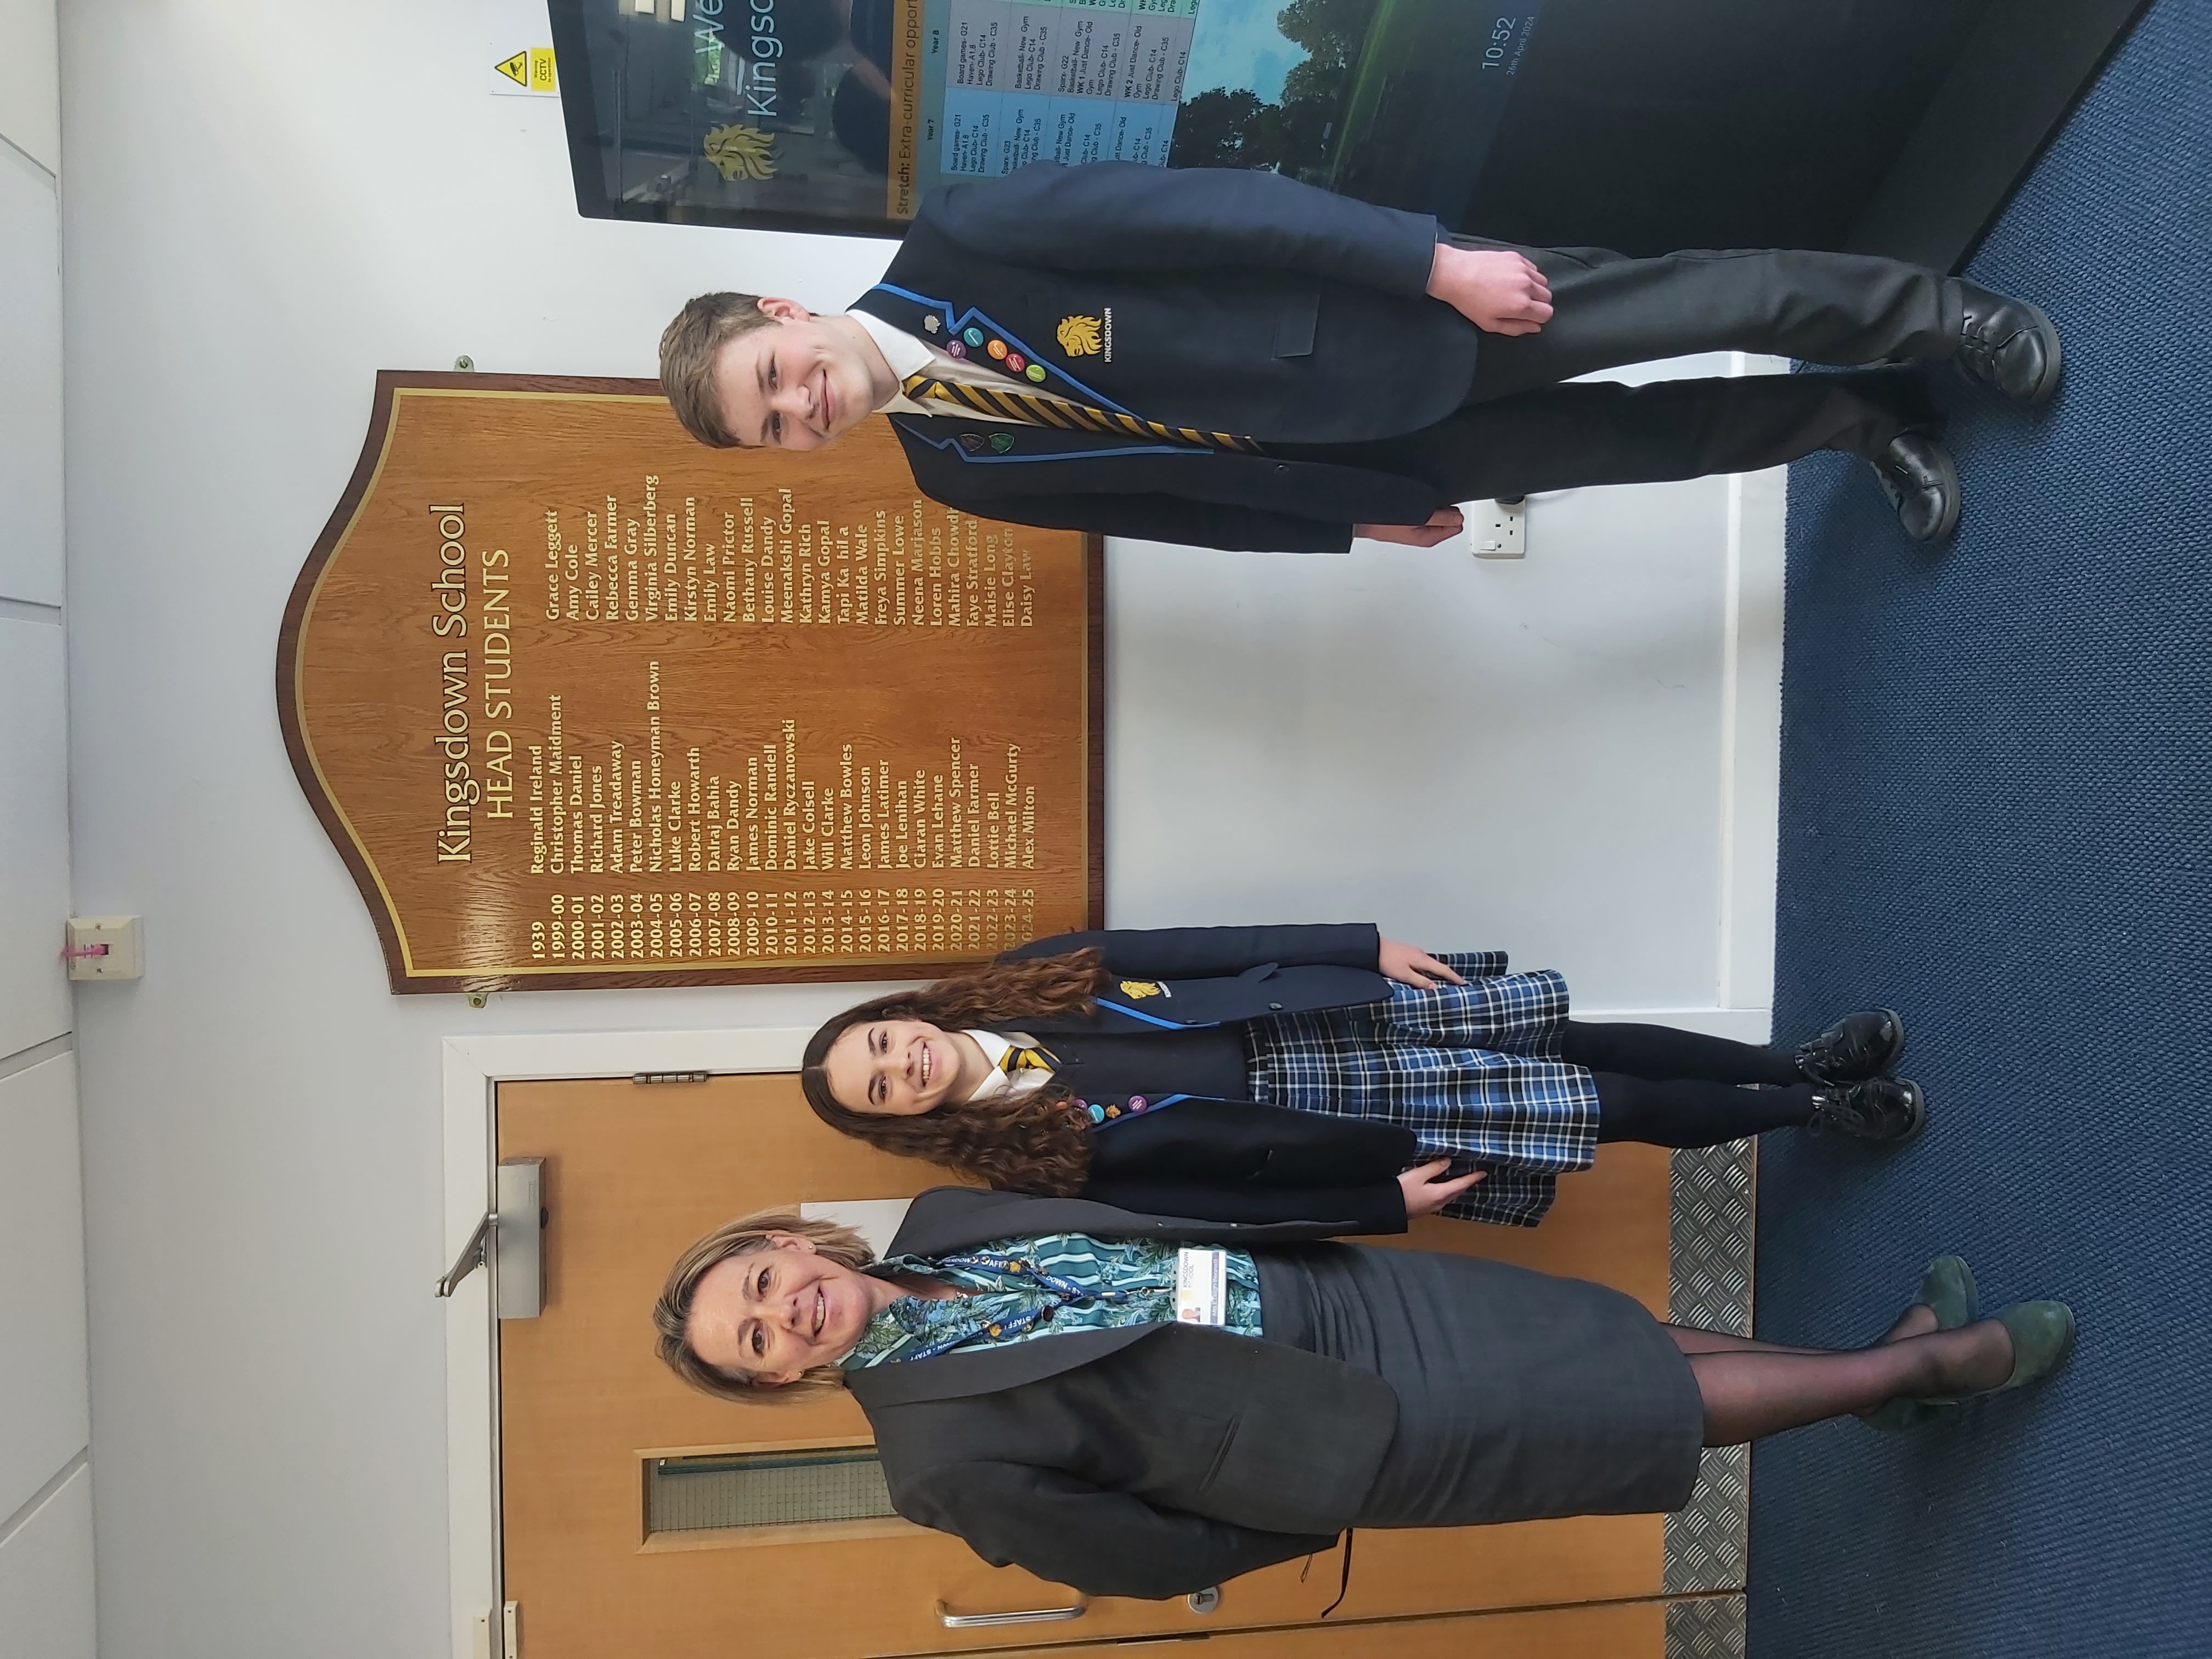 Congratulations to Daisy and Alex who have been appointed as the Head Boy and Head Girl, their names have been added to the Head Student board in reception. #KDSTeam